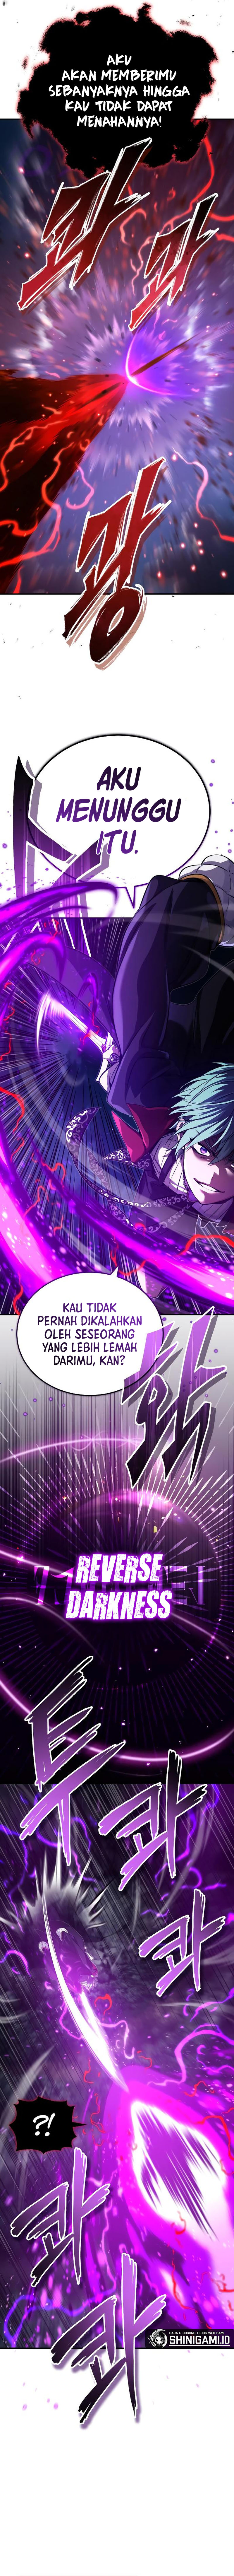 the-dark-magician-transmigrates-after-66666-years Chapter 86